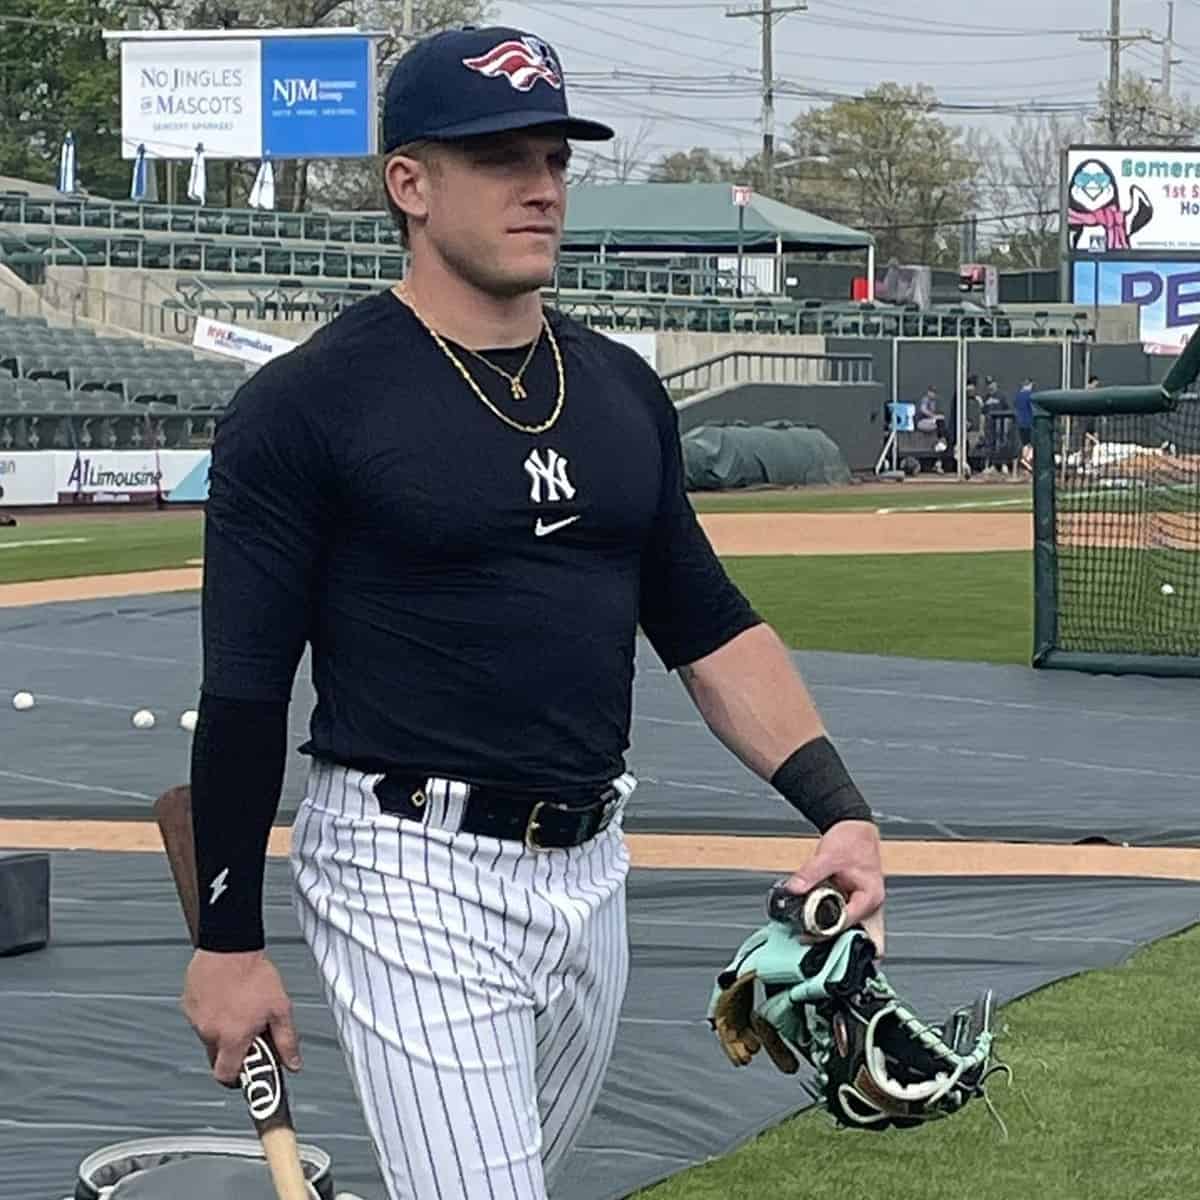 Yankees OF Harrison Bader Scheduled for Rehab with Somerset Patriots